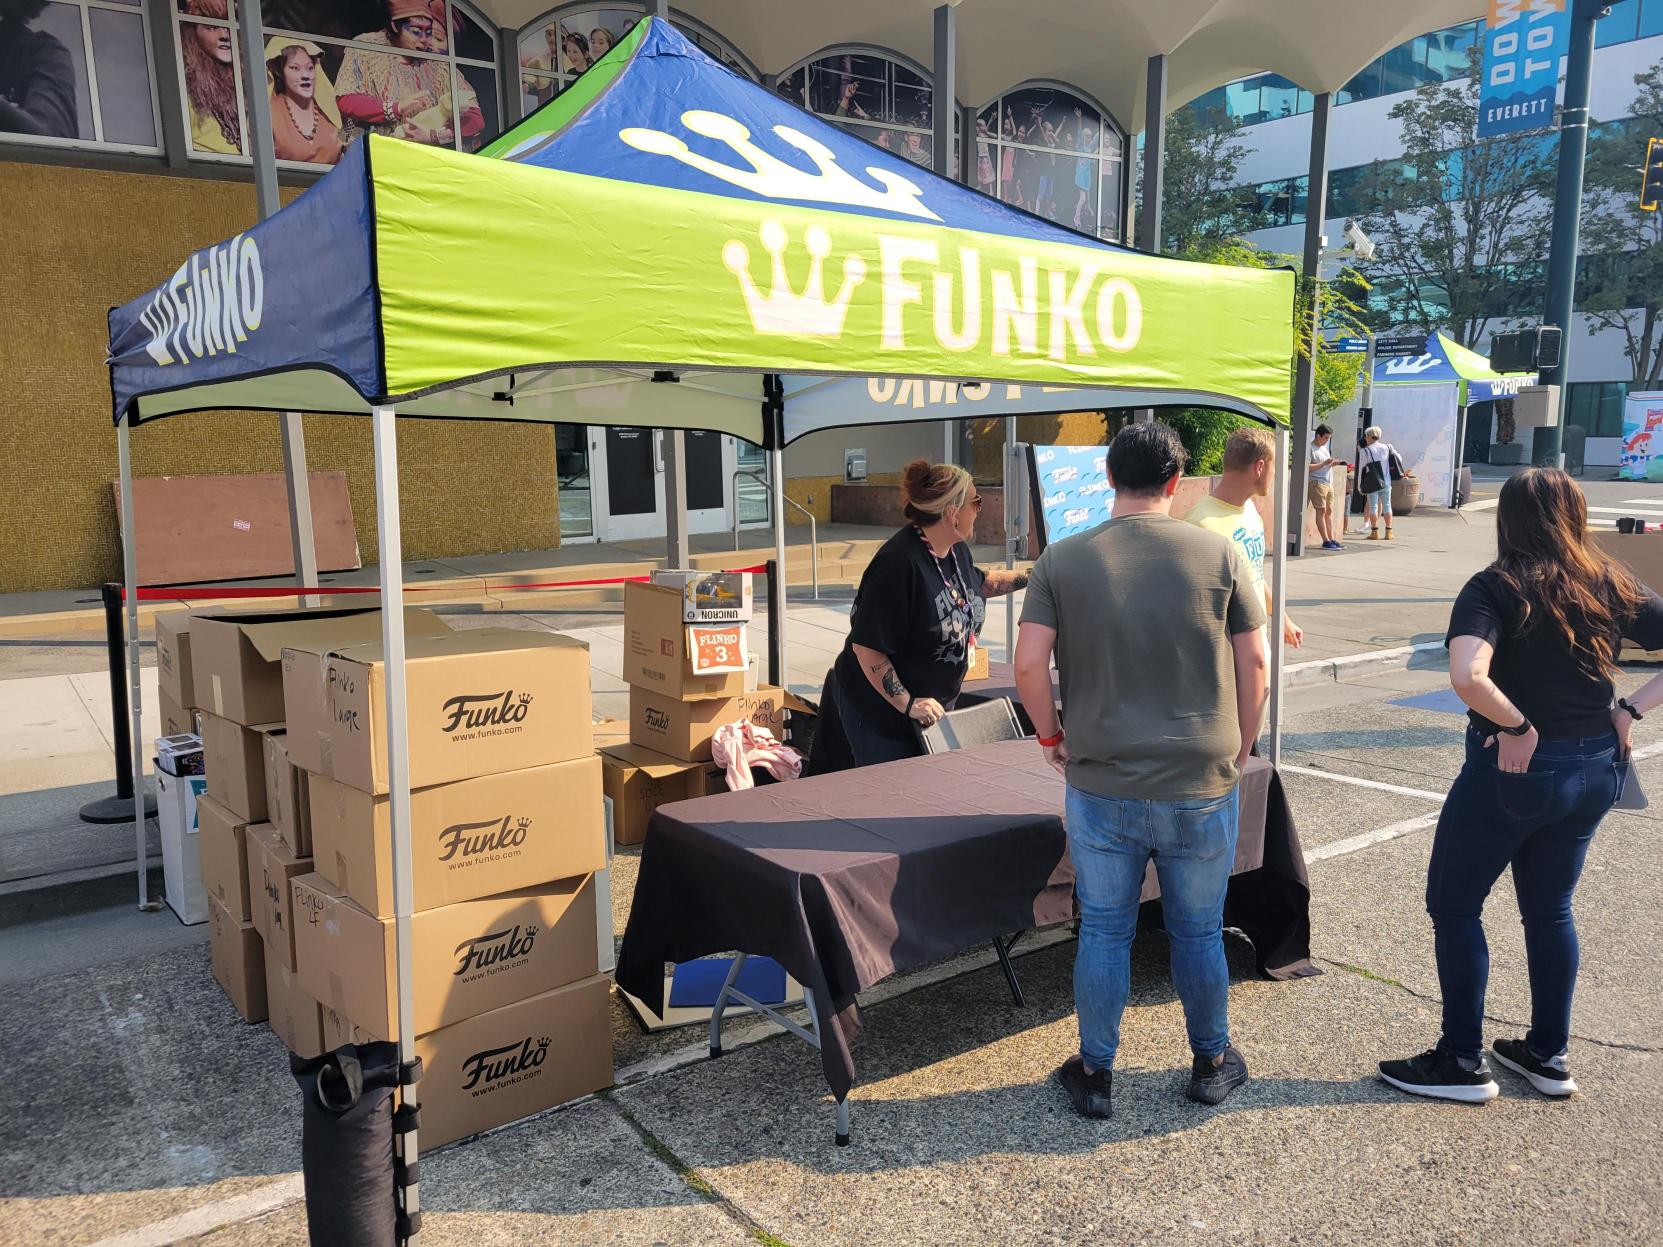 Set-Up: Volunteers help set up a tent on the street. Funko boxes are packed below.